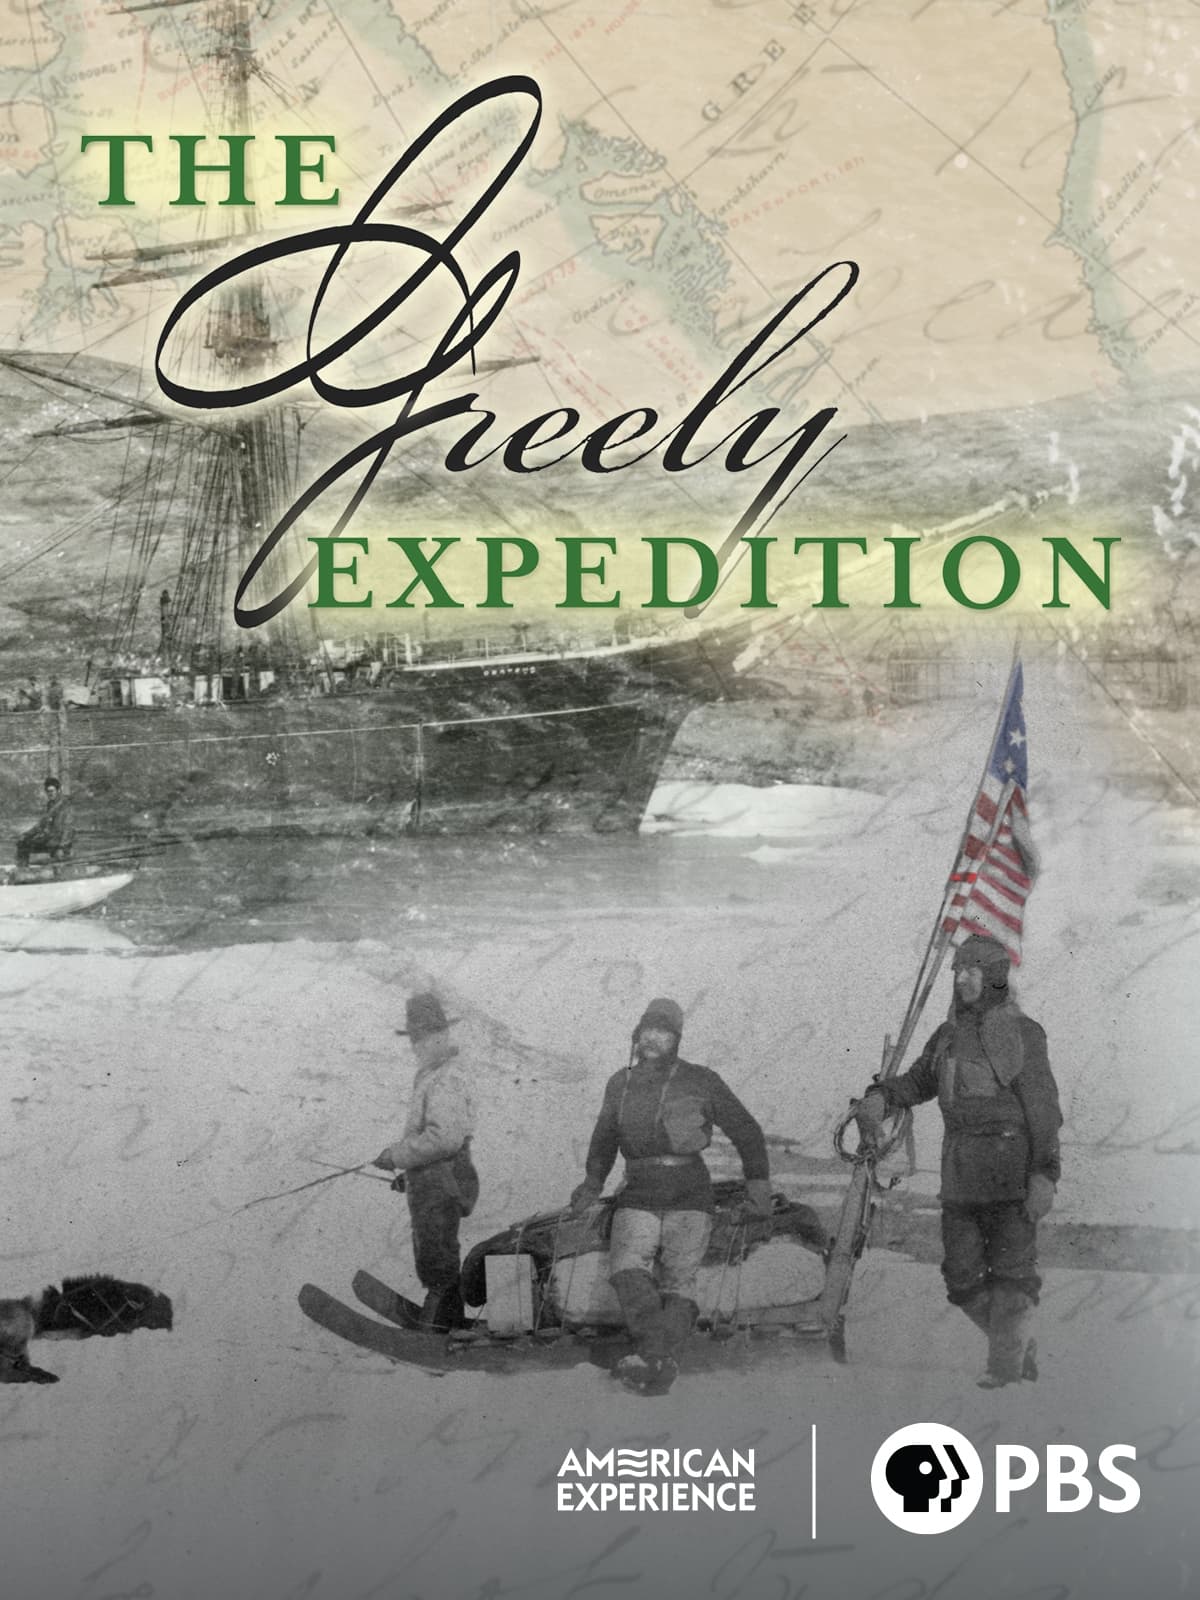 The Greely Expedition